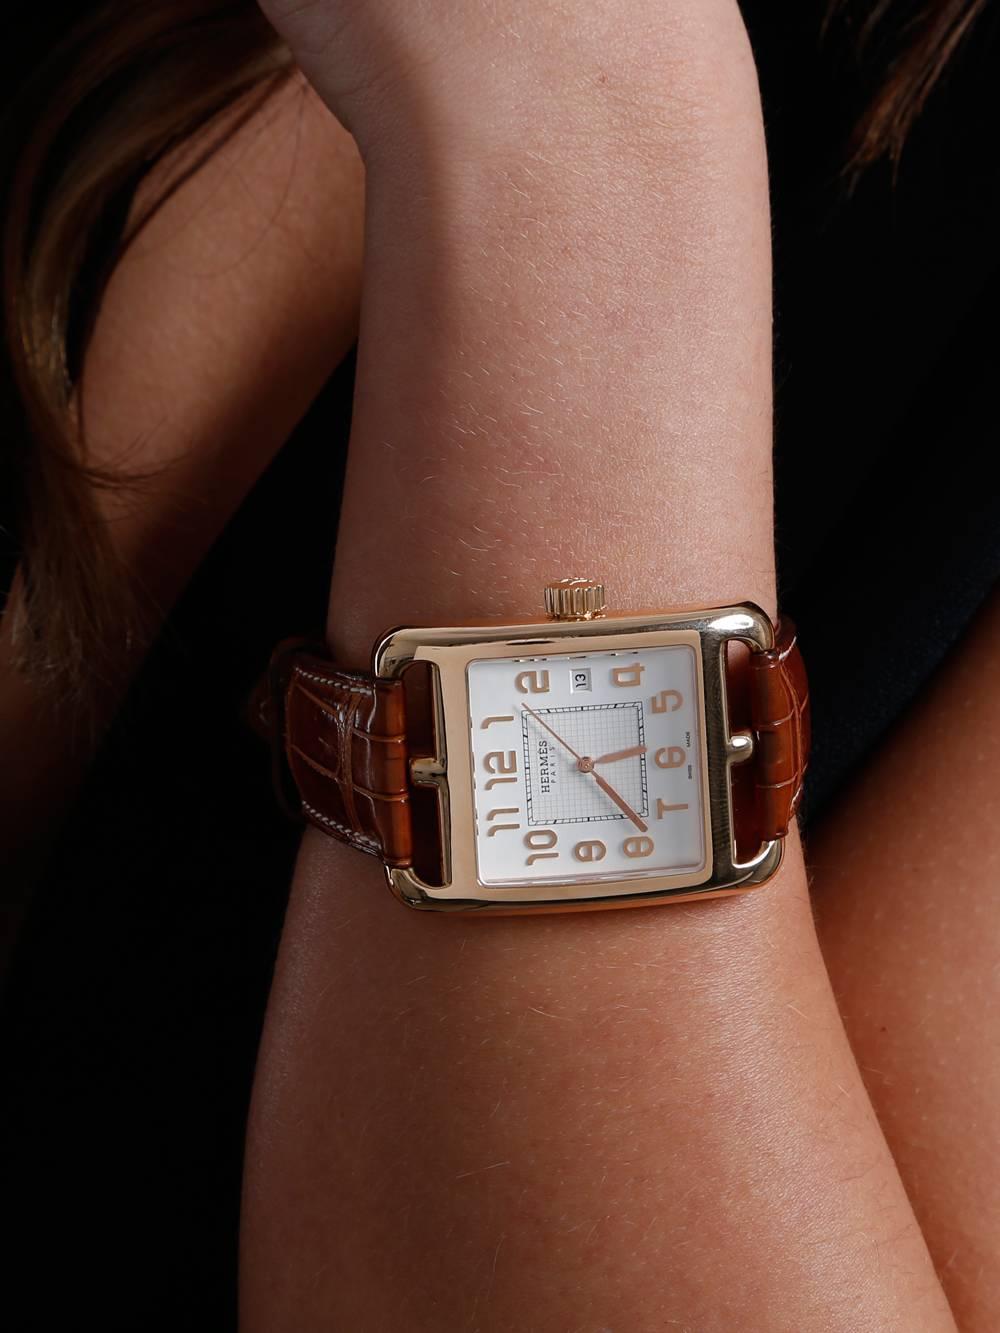 Practicality and style join forces in this 18-karat gold watch. The tortoiseshell brown hued band gives the timepiece a refined appearance while the inclusion of rose gold delivers a contemporary touch. Meticulous stitching in a shade of light tan